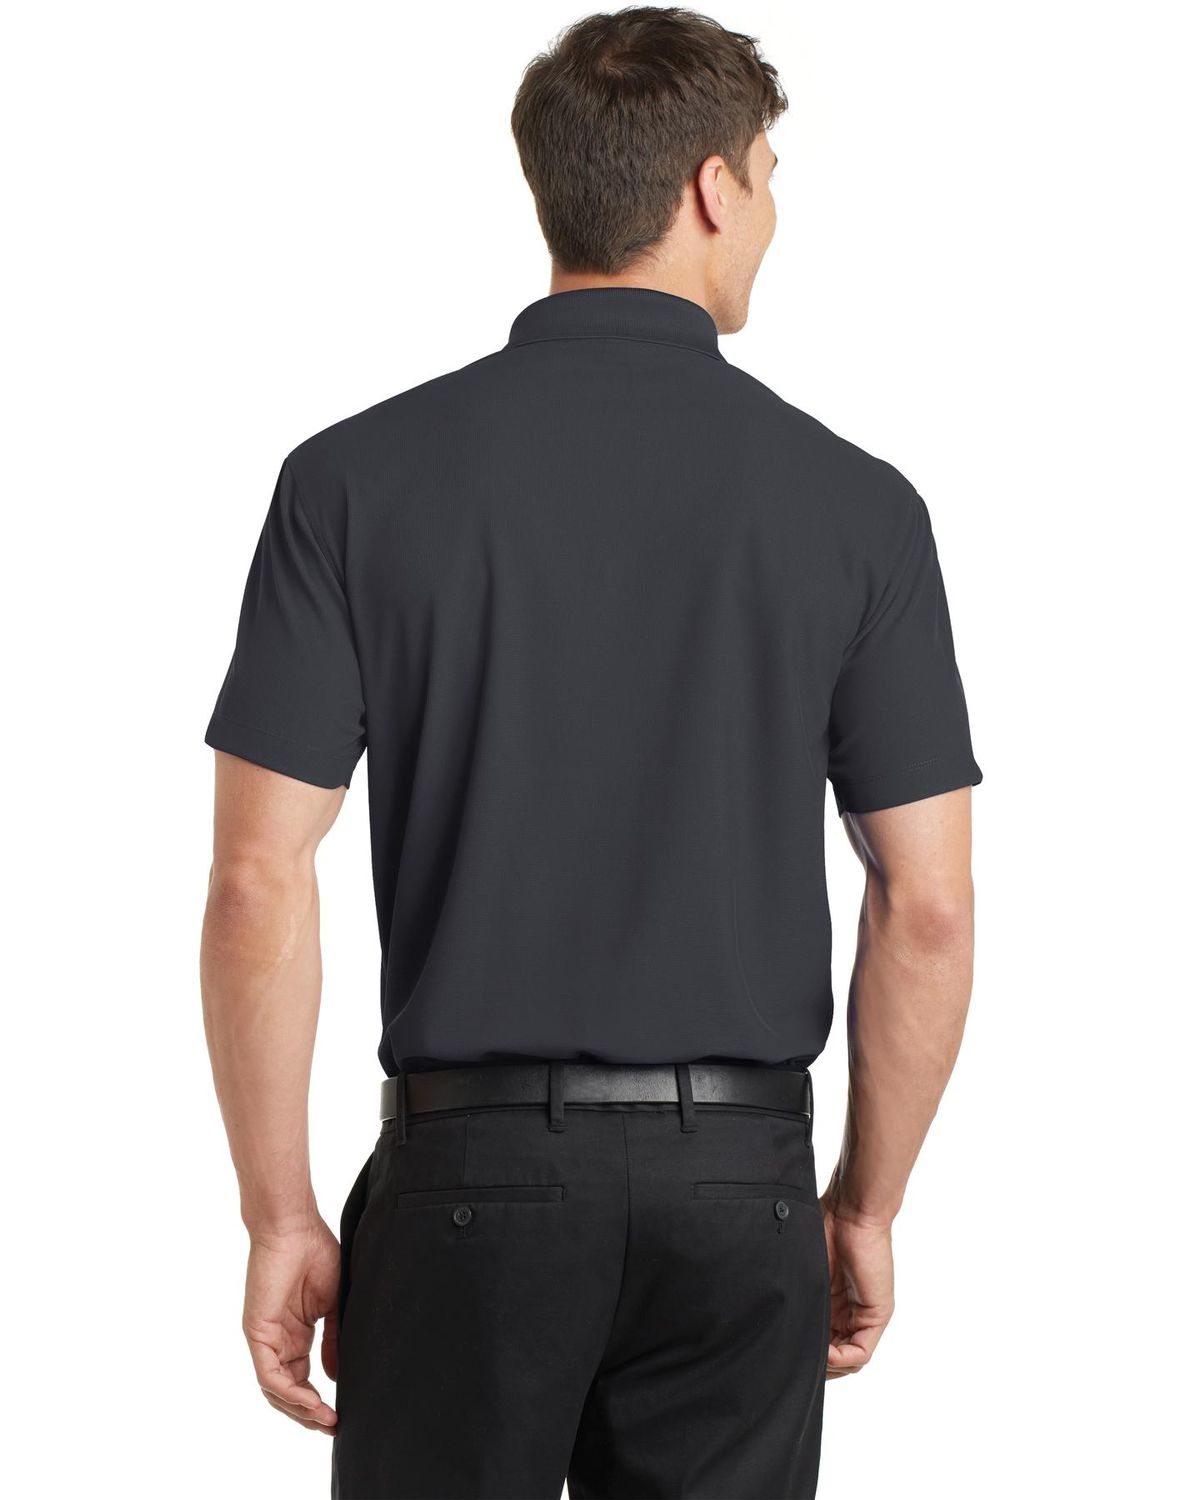 'Port Authority K572 Cotton Dry Zone Grid Pure Polo Shirt '